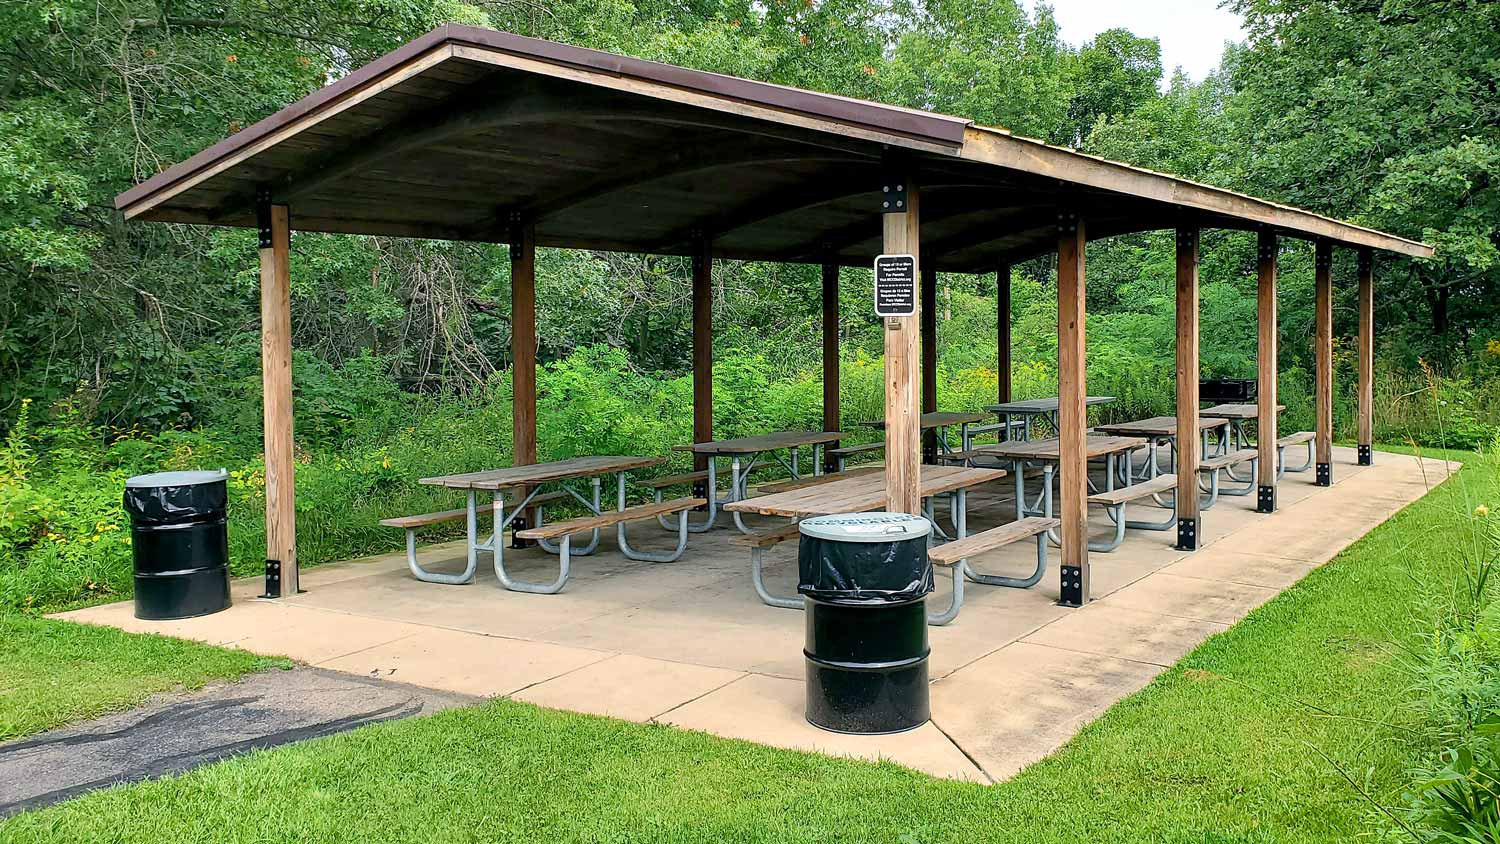 Picnic shelter by the pond at the Pleasant Valley Conservation Area.